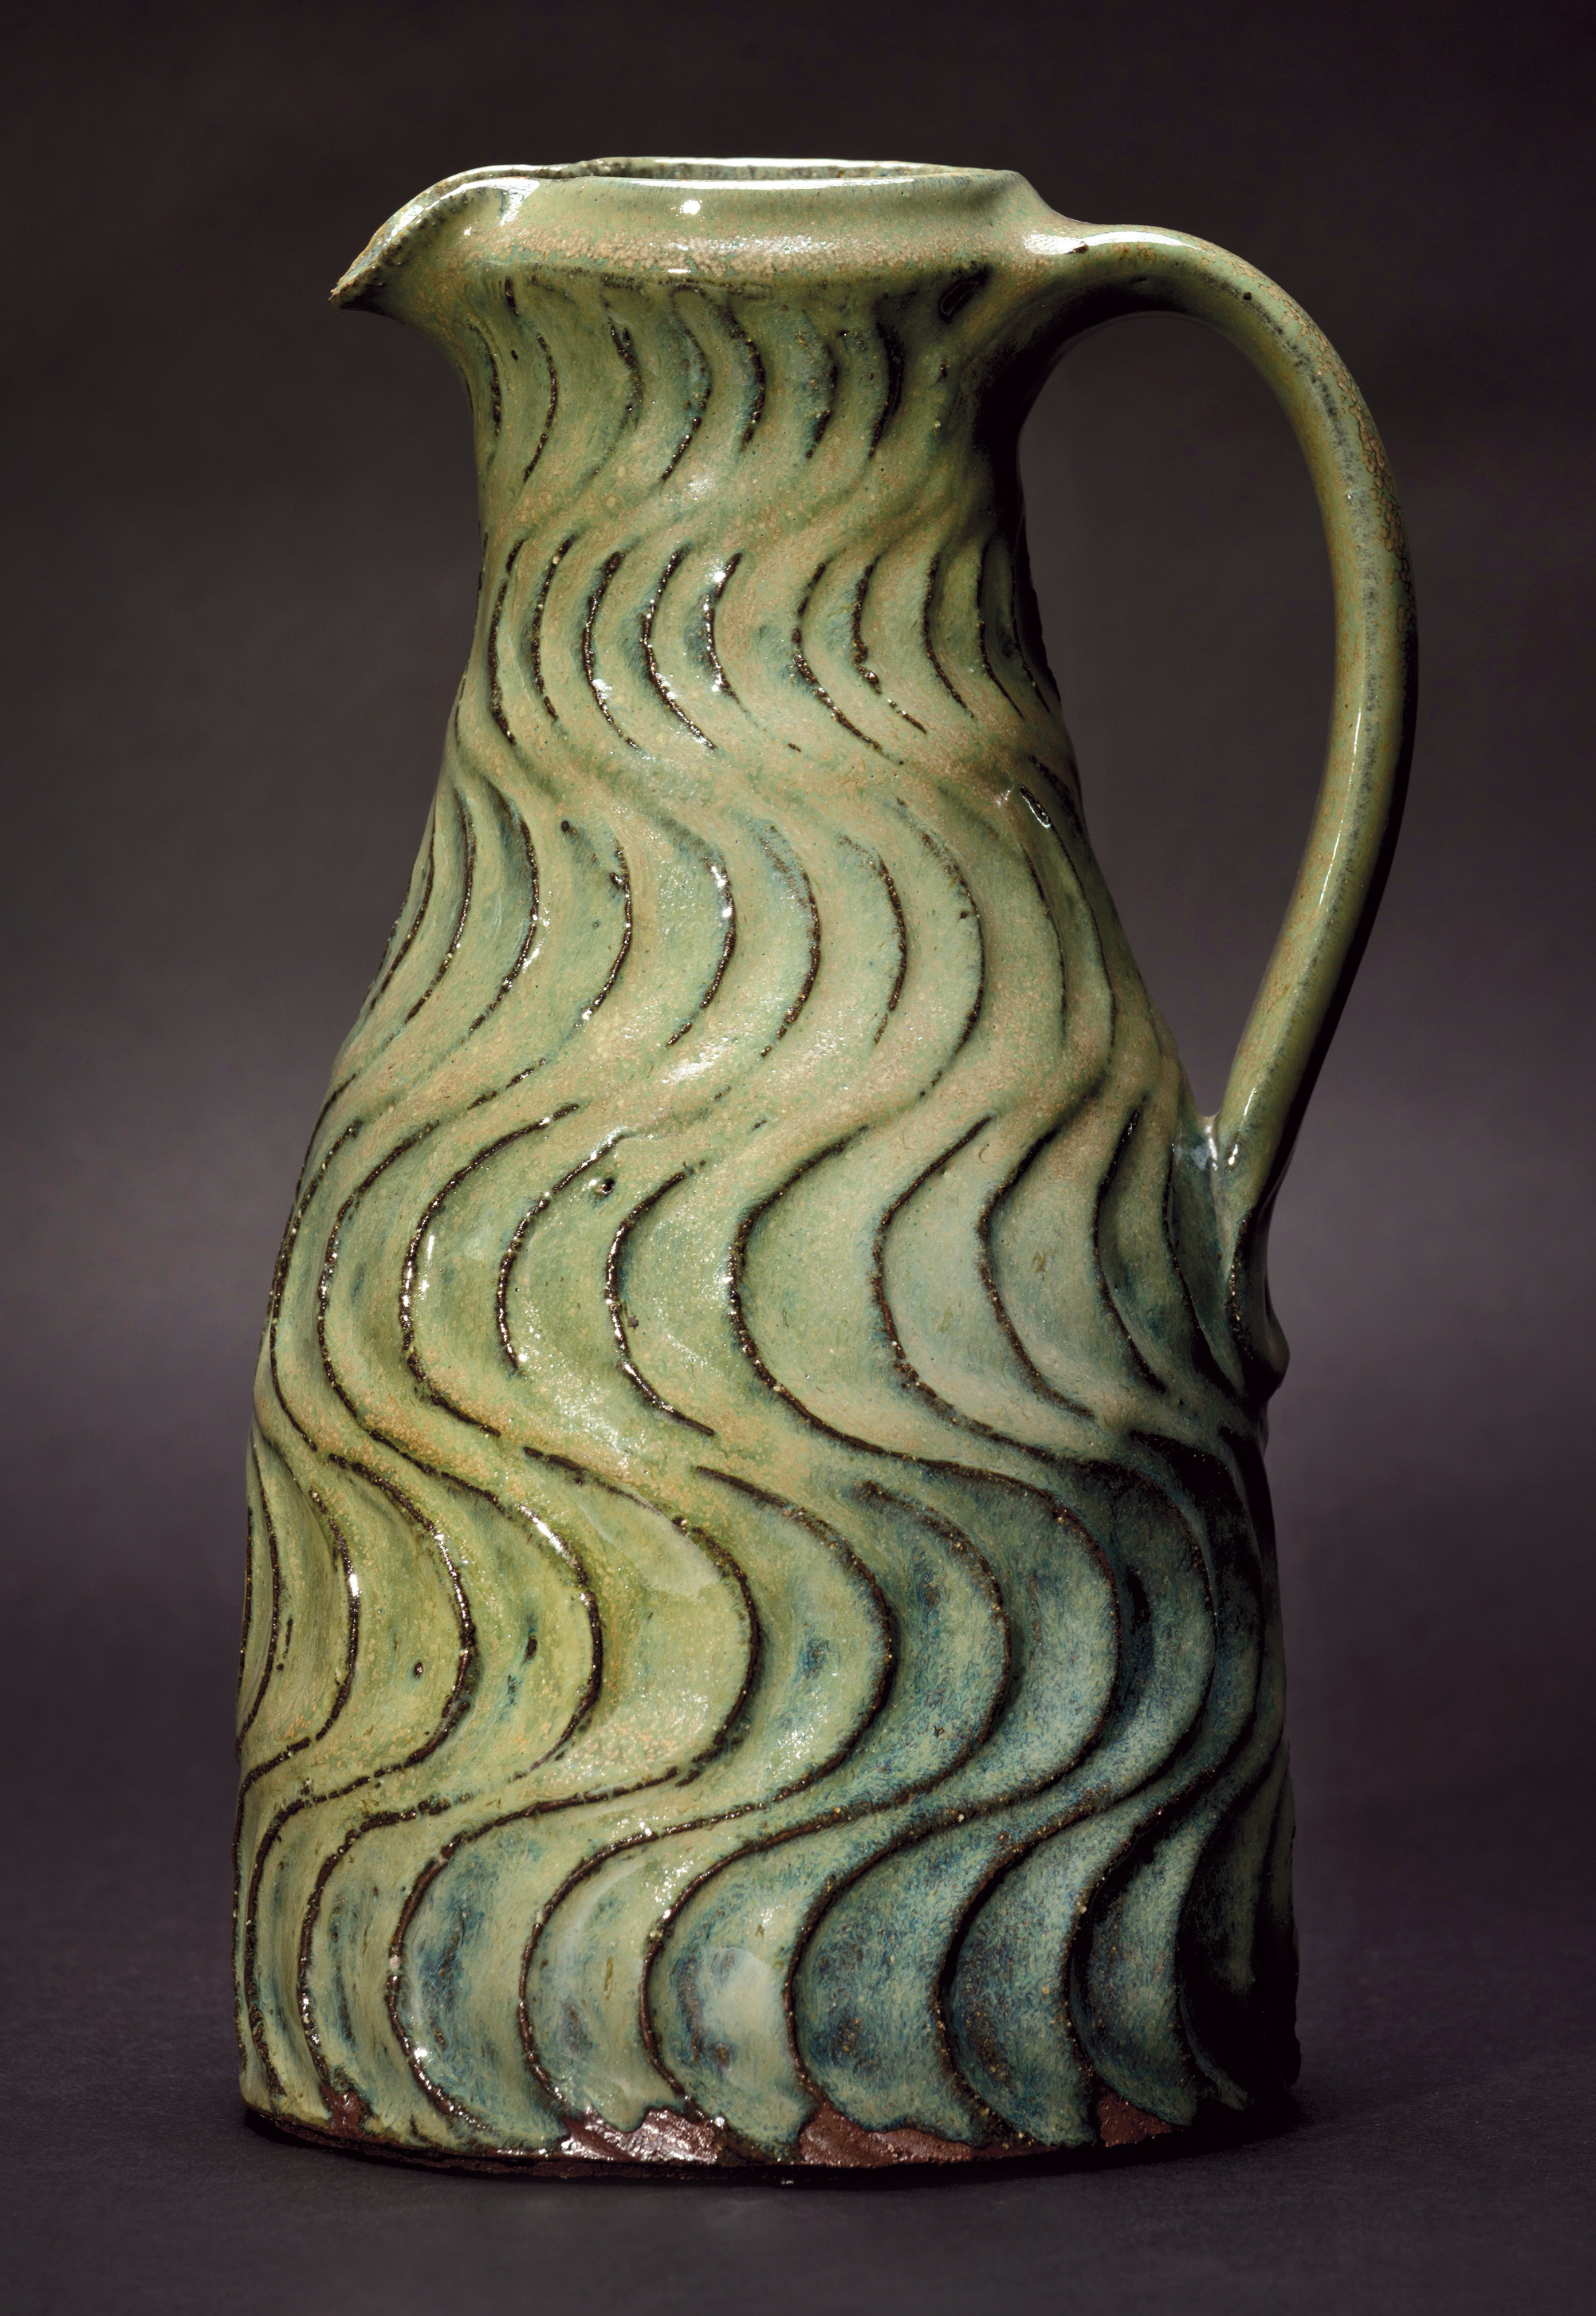 Willi Singleton. Woodfired Carved Pitcher, 2016. Hawk Mountain and Chesapeake clays, cornstalk ash glaze with copper. 11 x 6 x 5 in. Photograph by KenEk Photography.